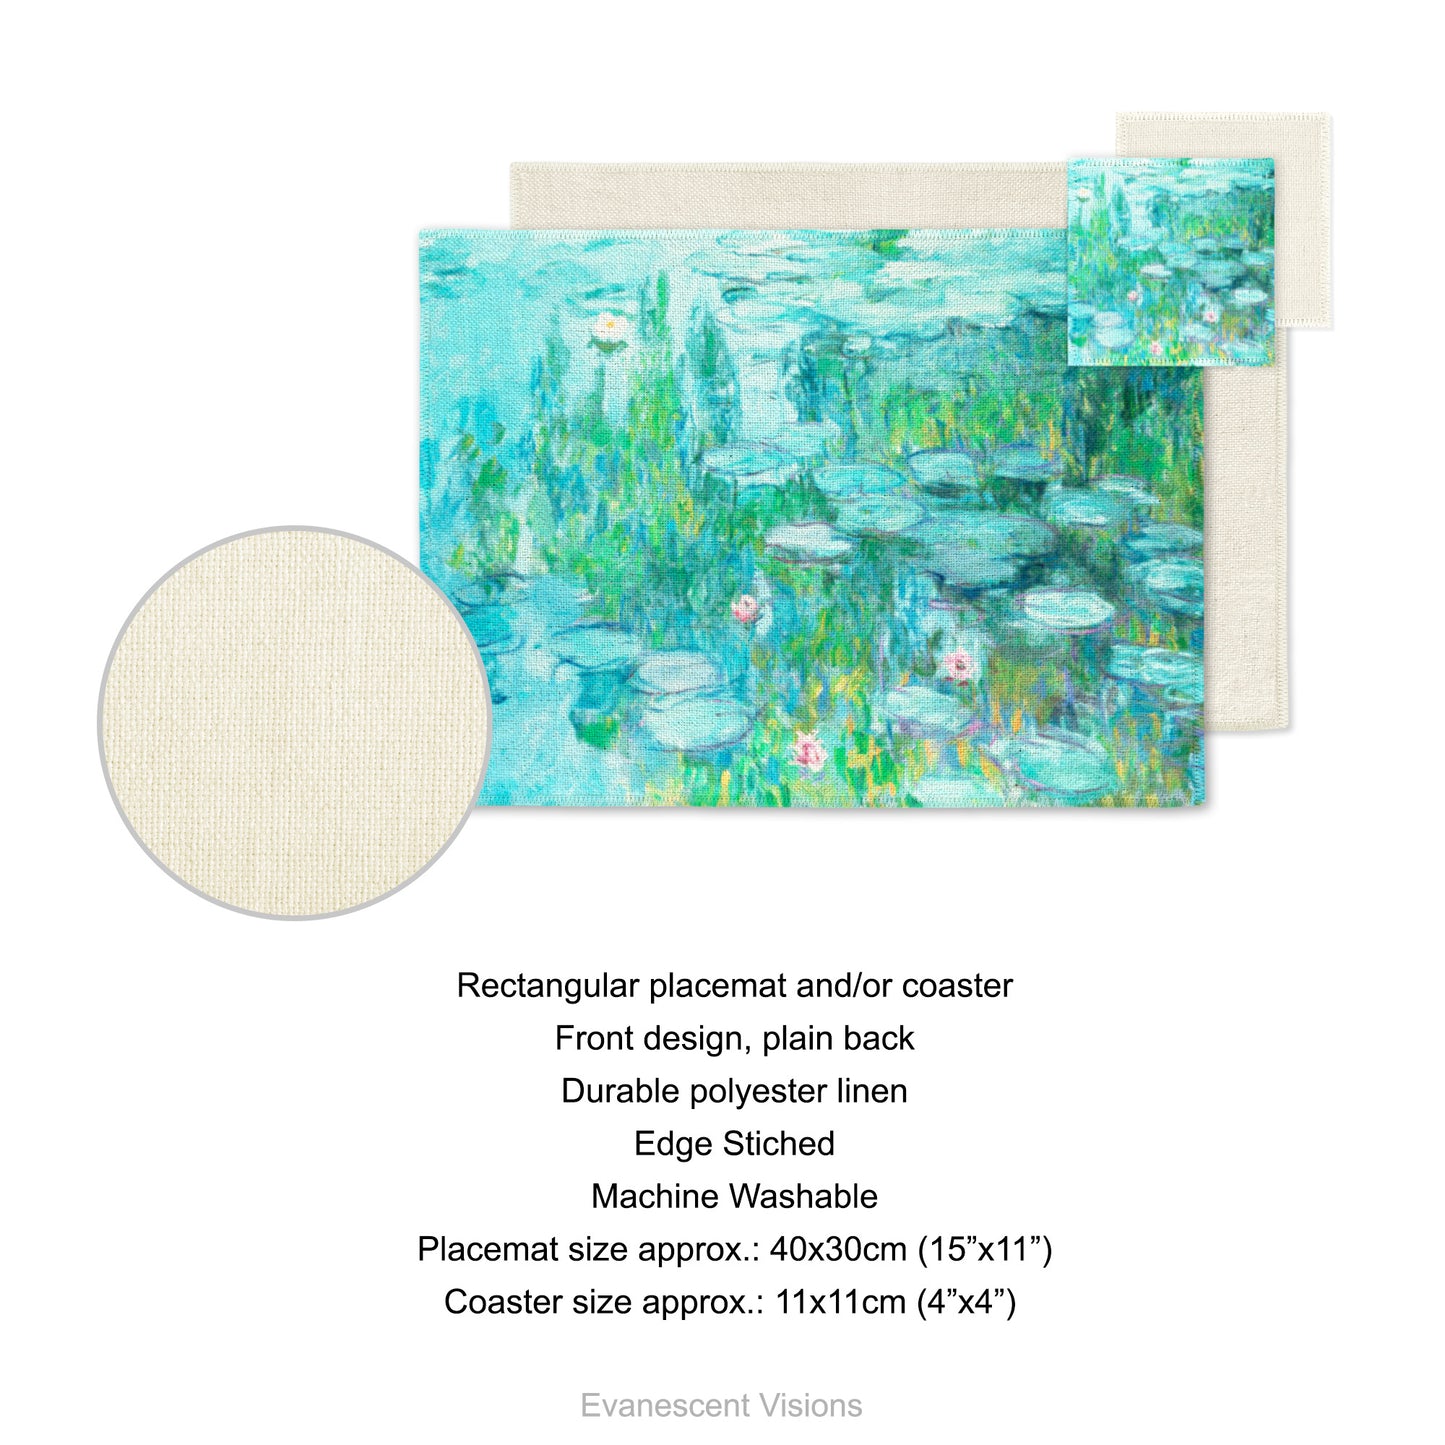 Placemat and coaster with design based on artwork, 'Water Lilies' circa 1915 by Claude Monet.  Product details for placemat and coaster. Front design, plain back, durable polyester linen, edge sticked, machine washable. Placemat size approx 40x30cm (15"x11"). Coaster size approx 11x11cm (4"x4")